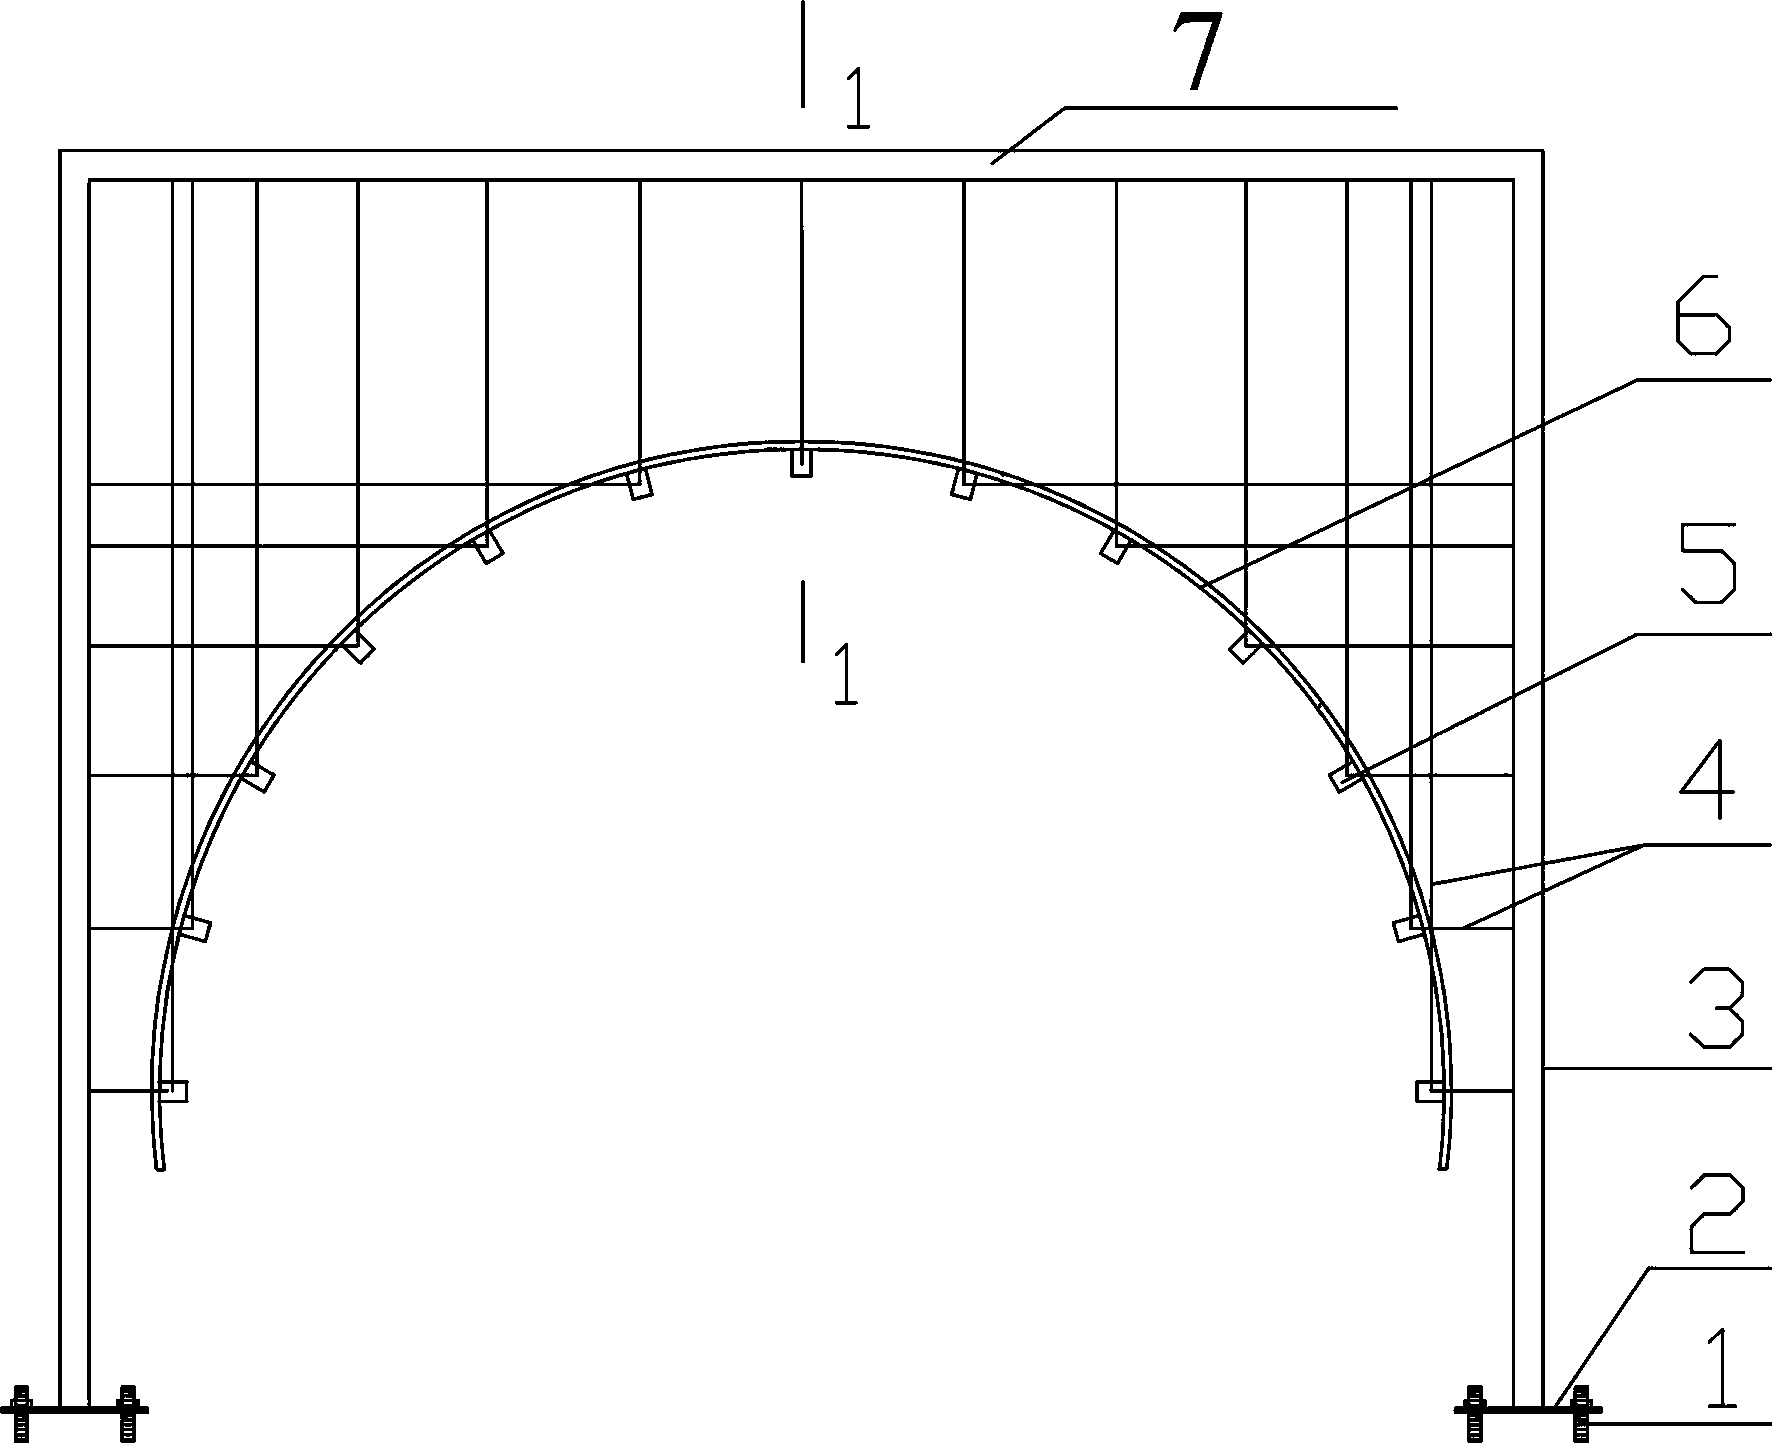 Arc-shaped formwork bottom support system